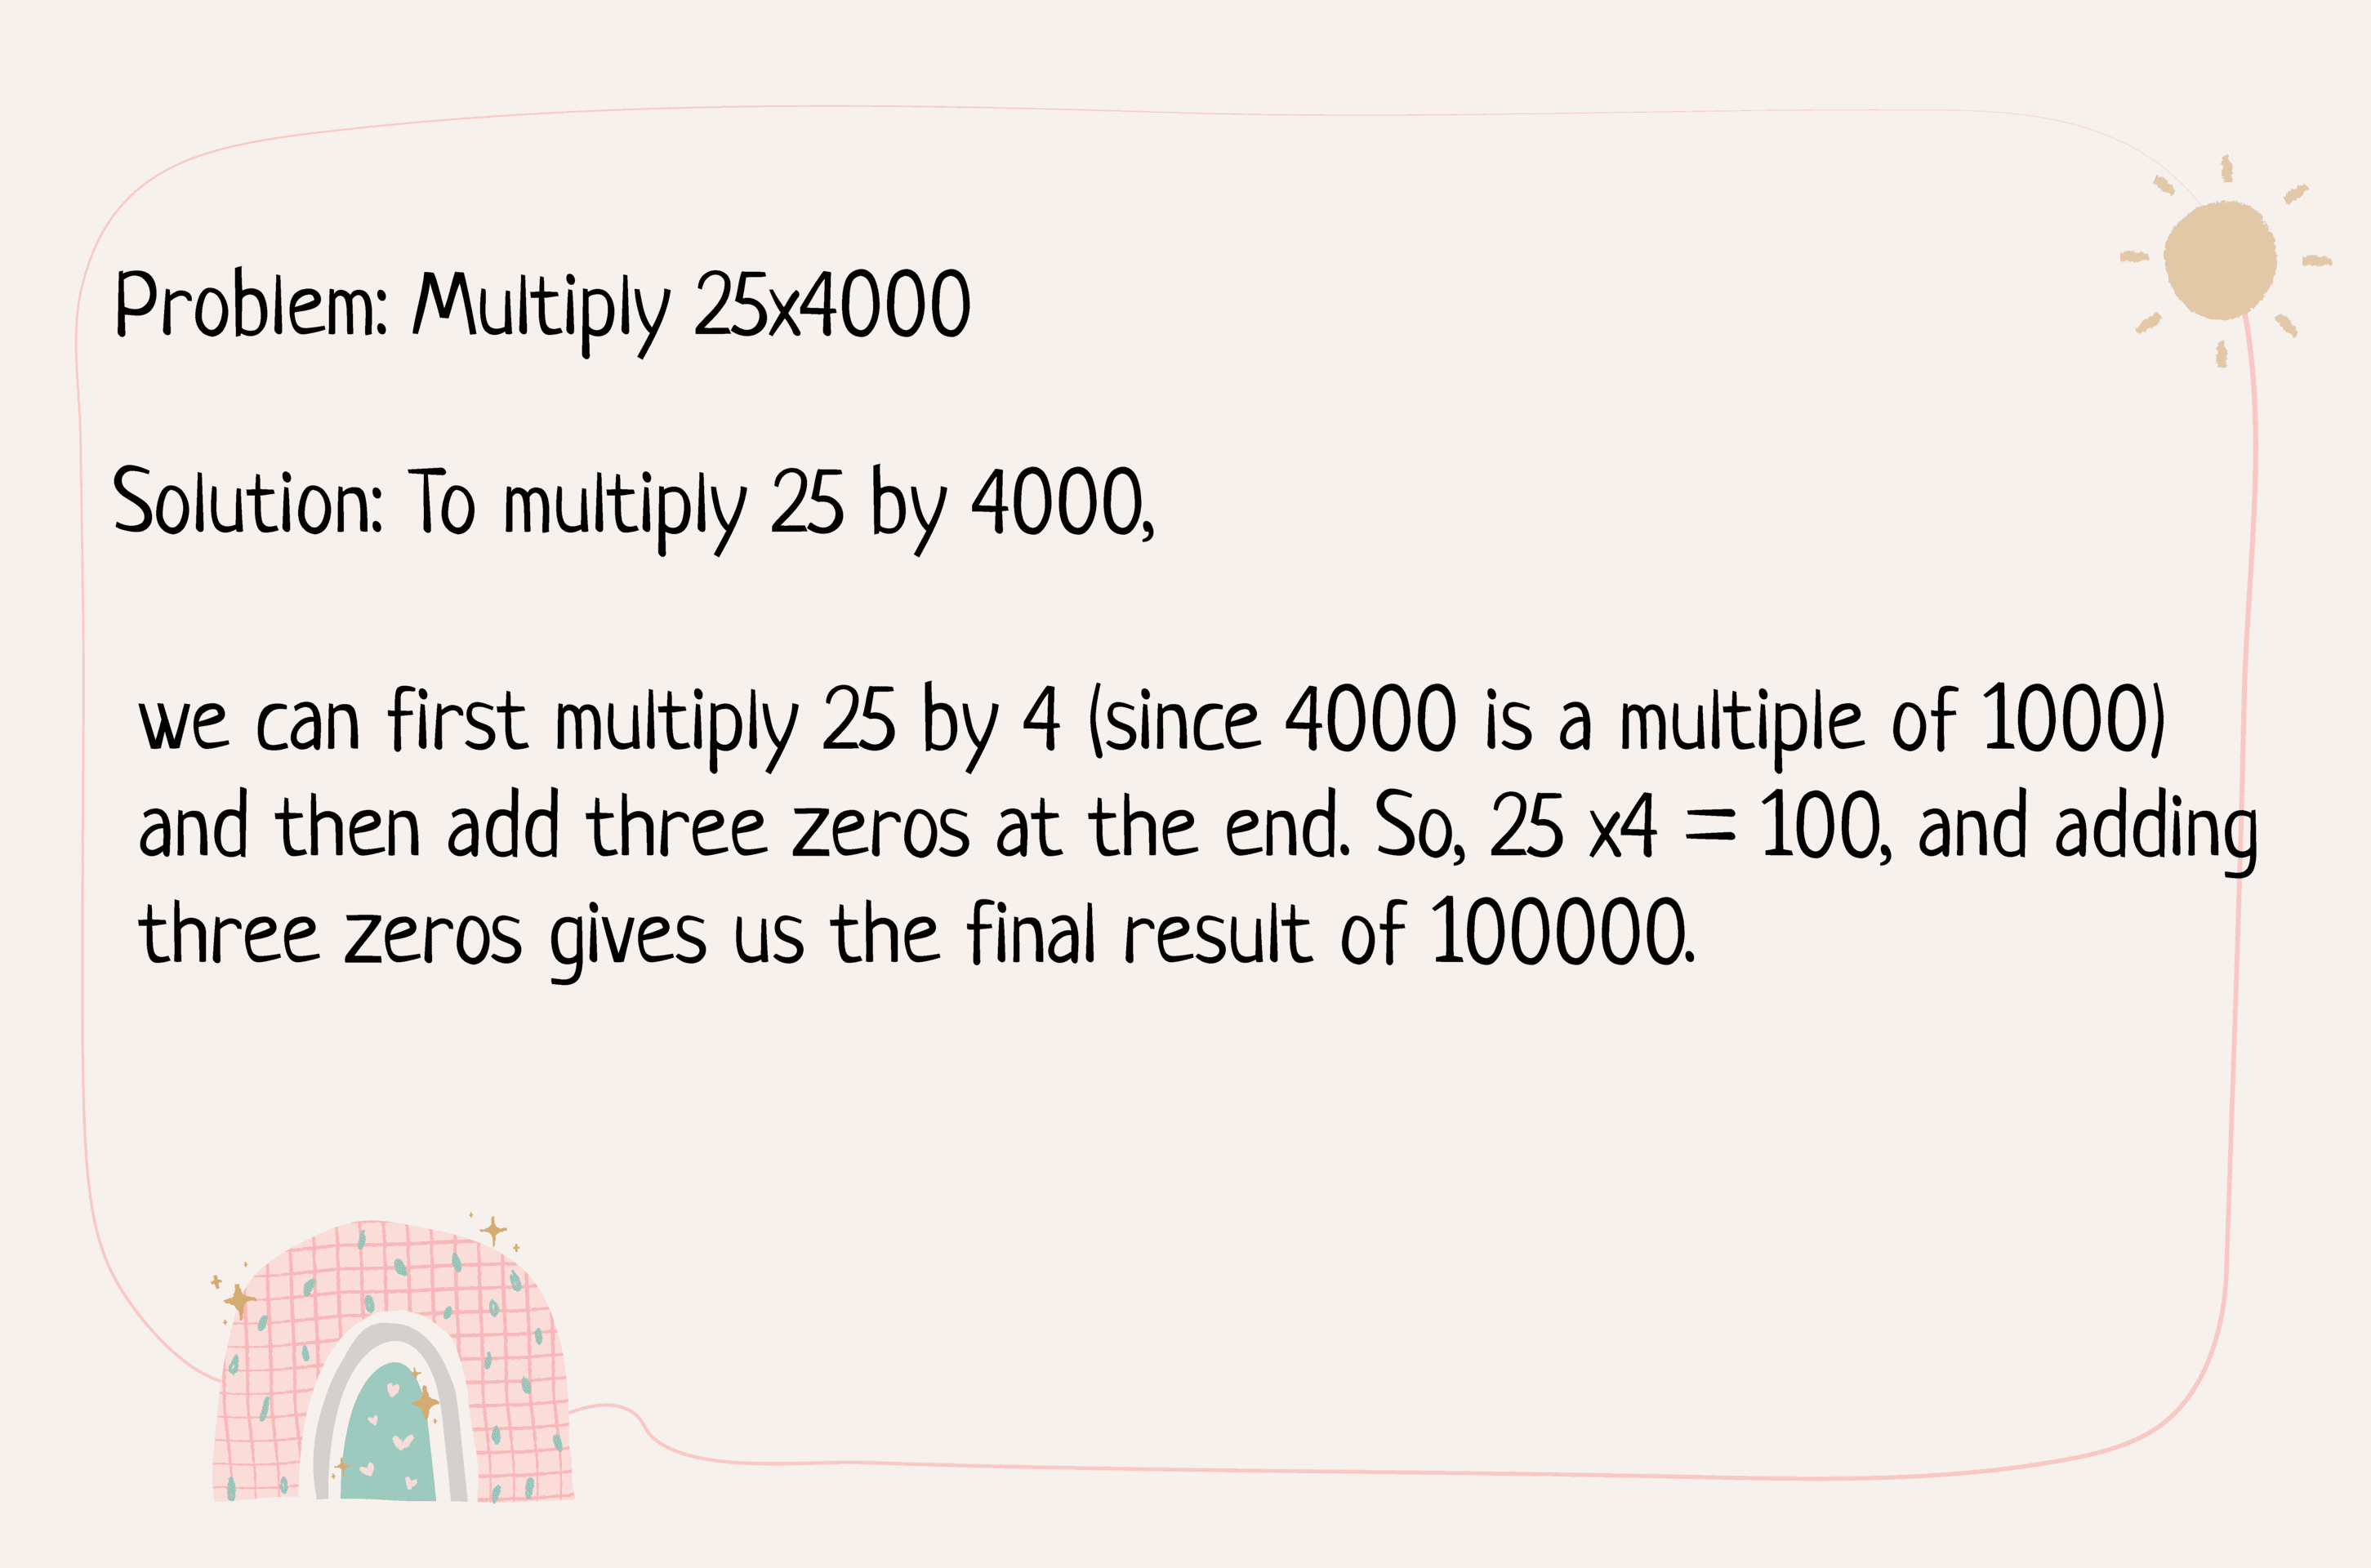 4. Explaining a problem related to multiplying by multiples of 10 100 and 1000